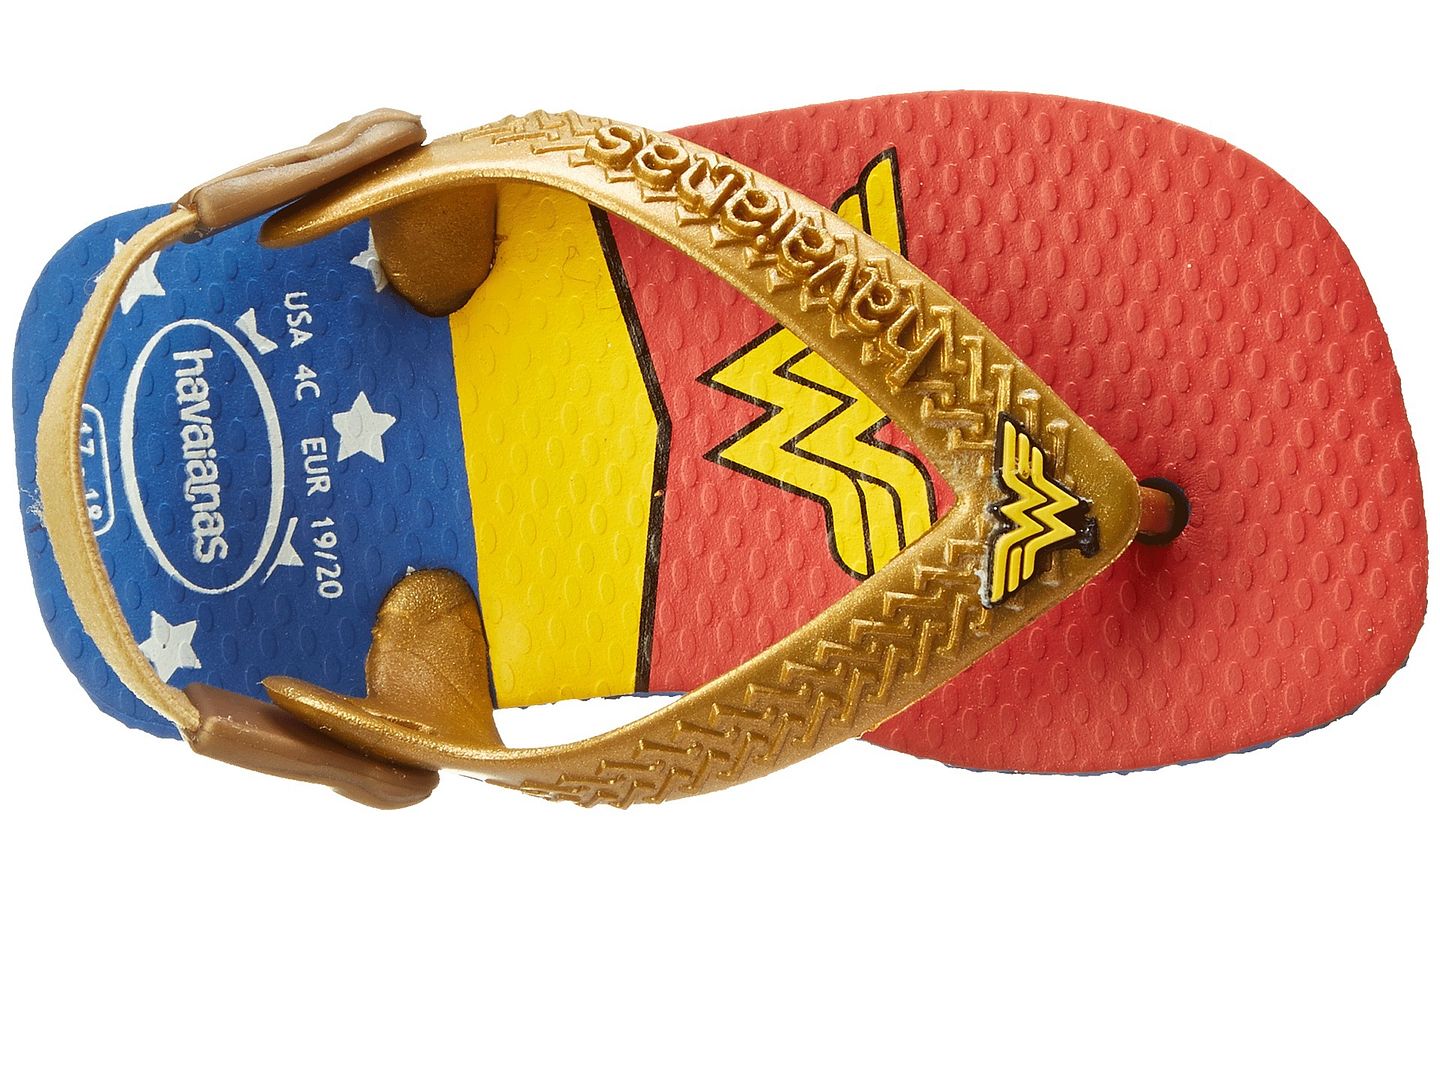 Wonder Woman Havaianas in toddler and kid sizes